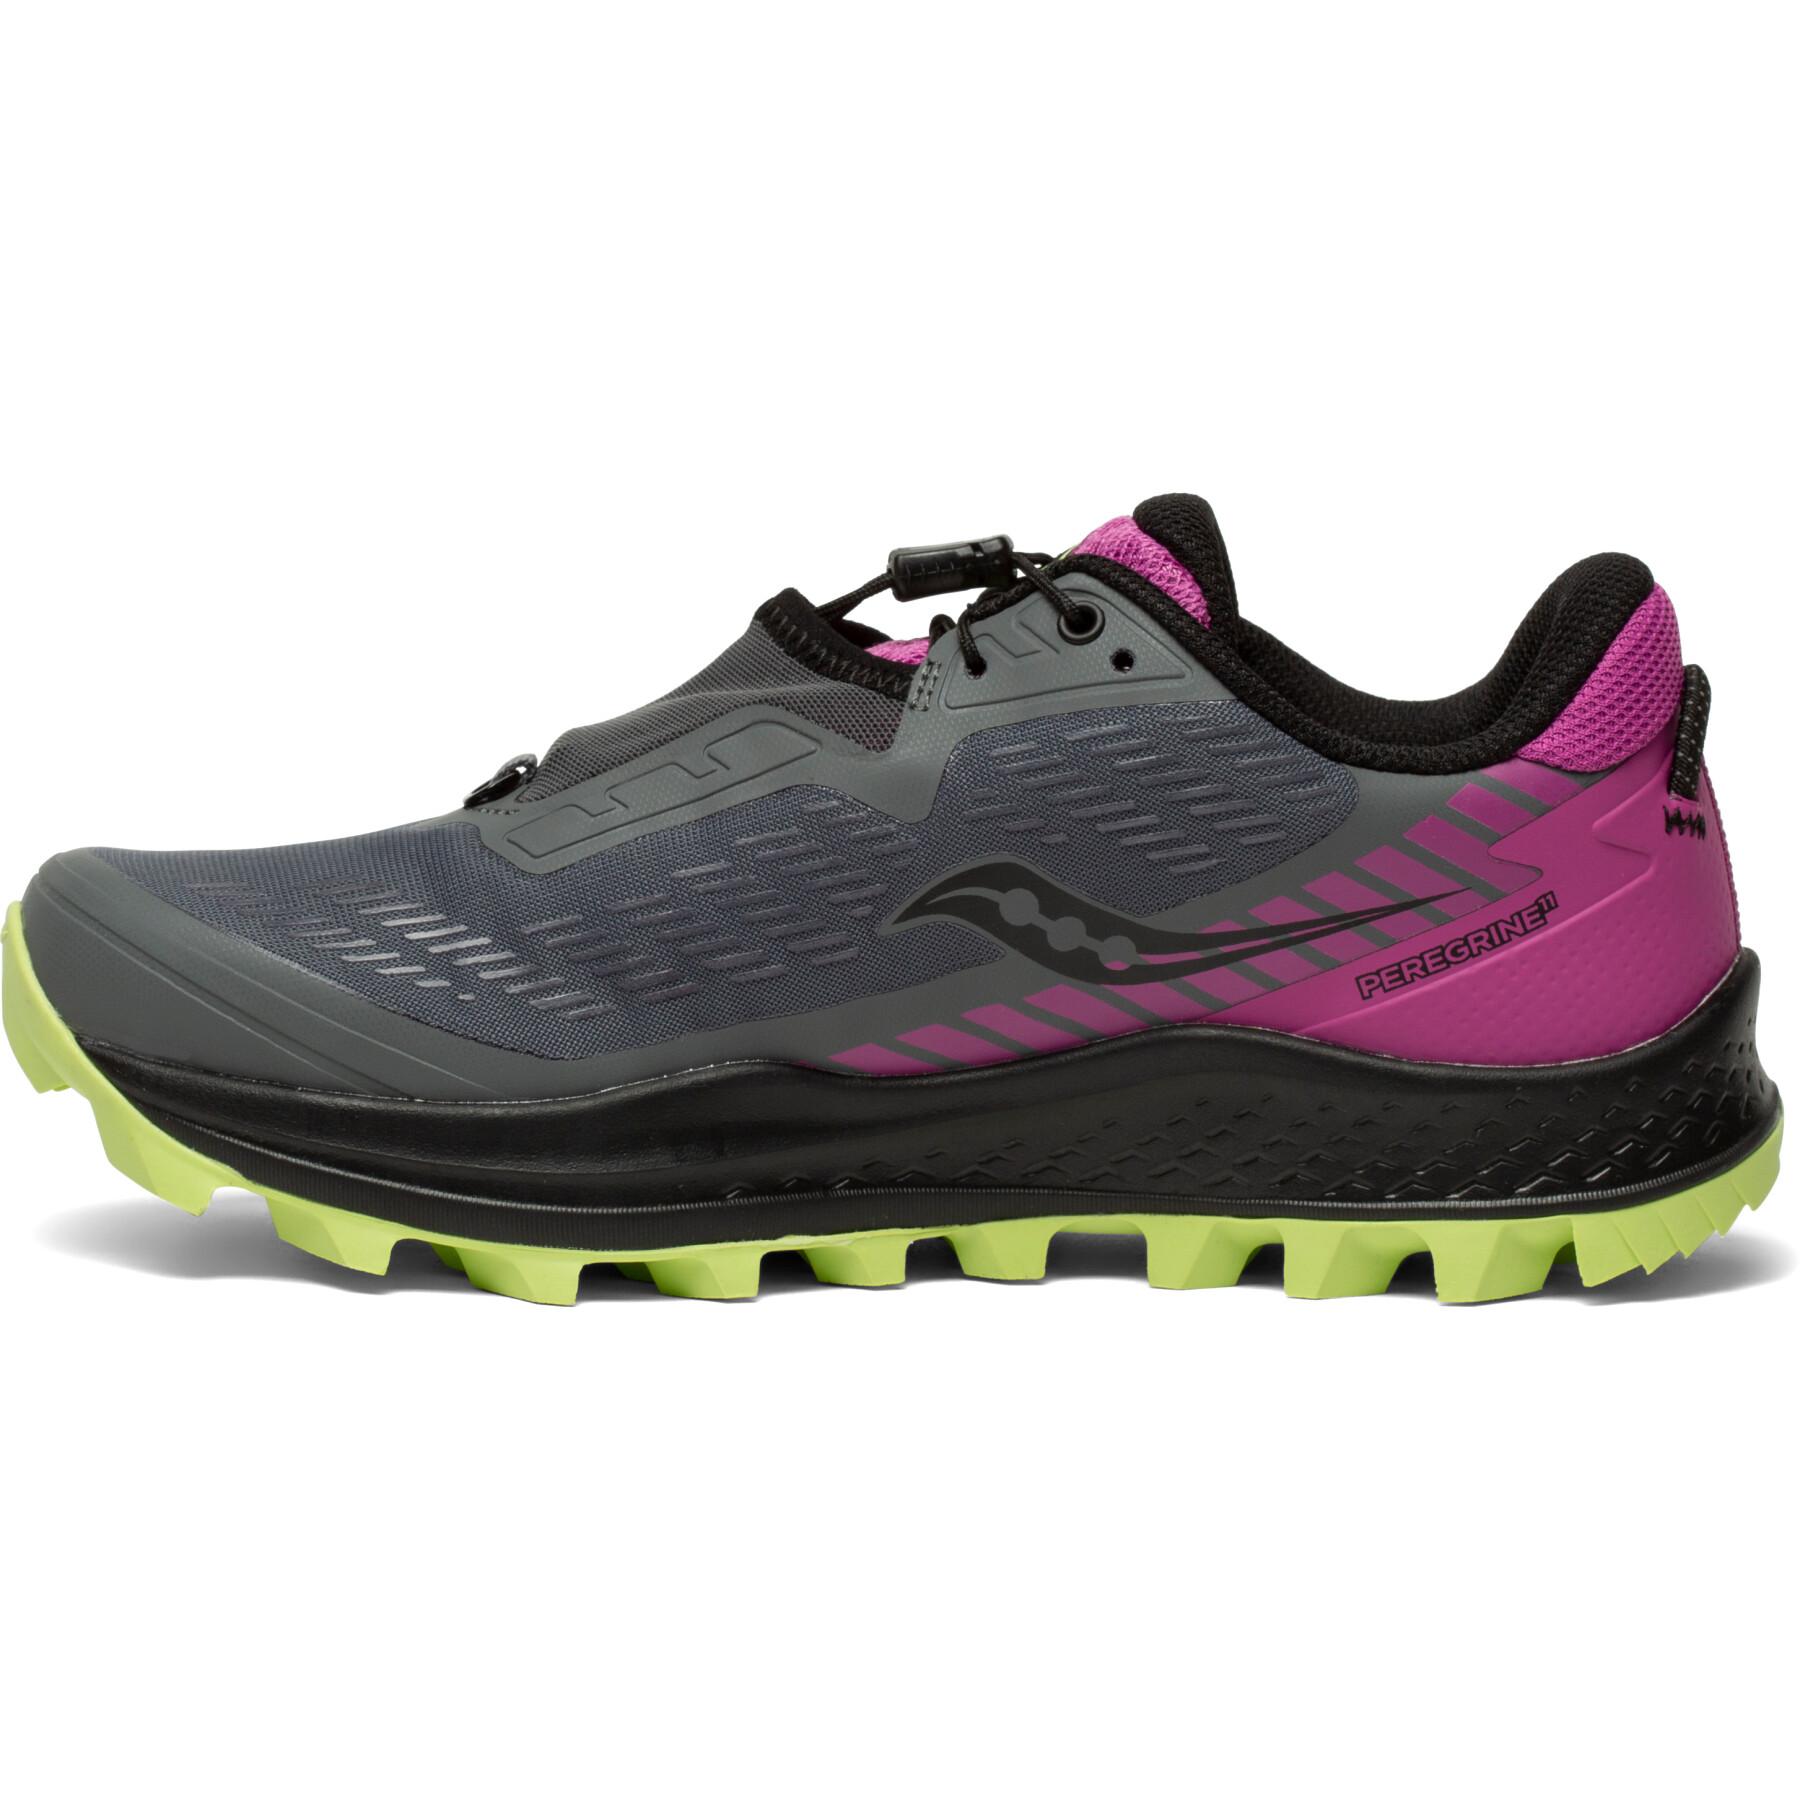 Chaussures femme Saucony peregrine 11 st